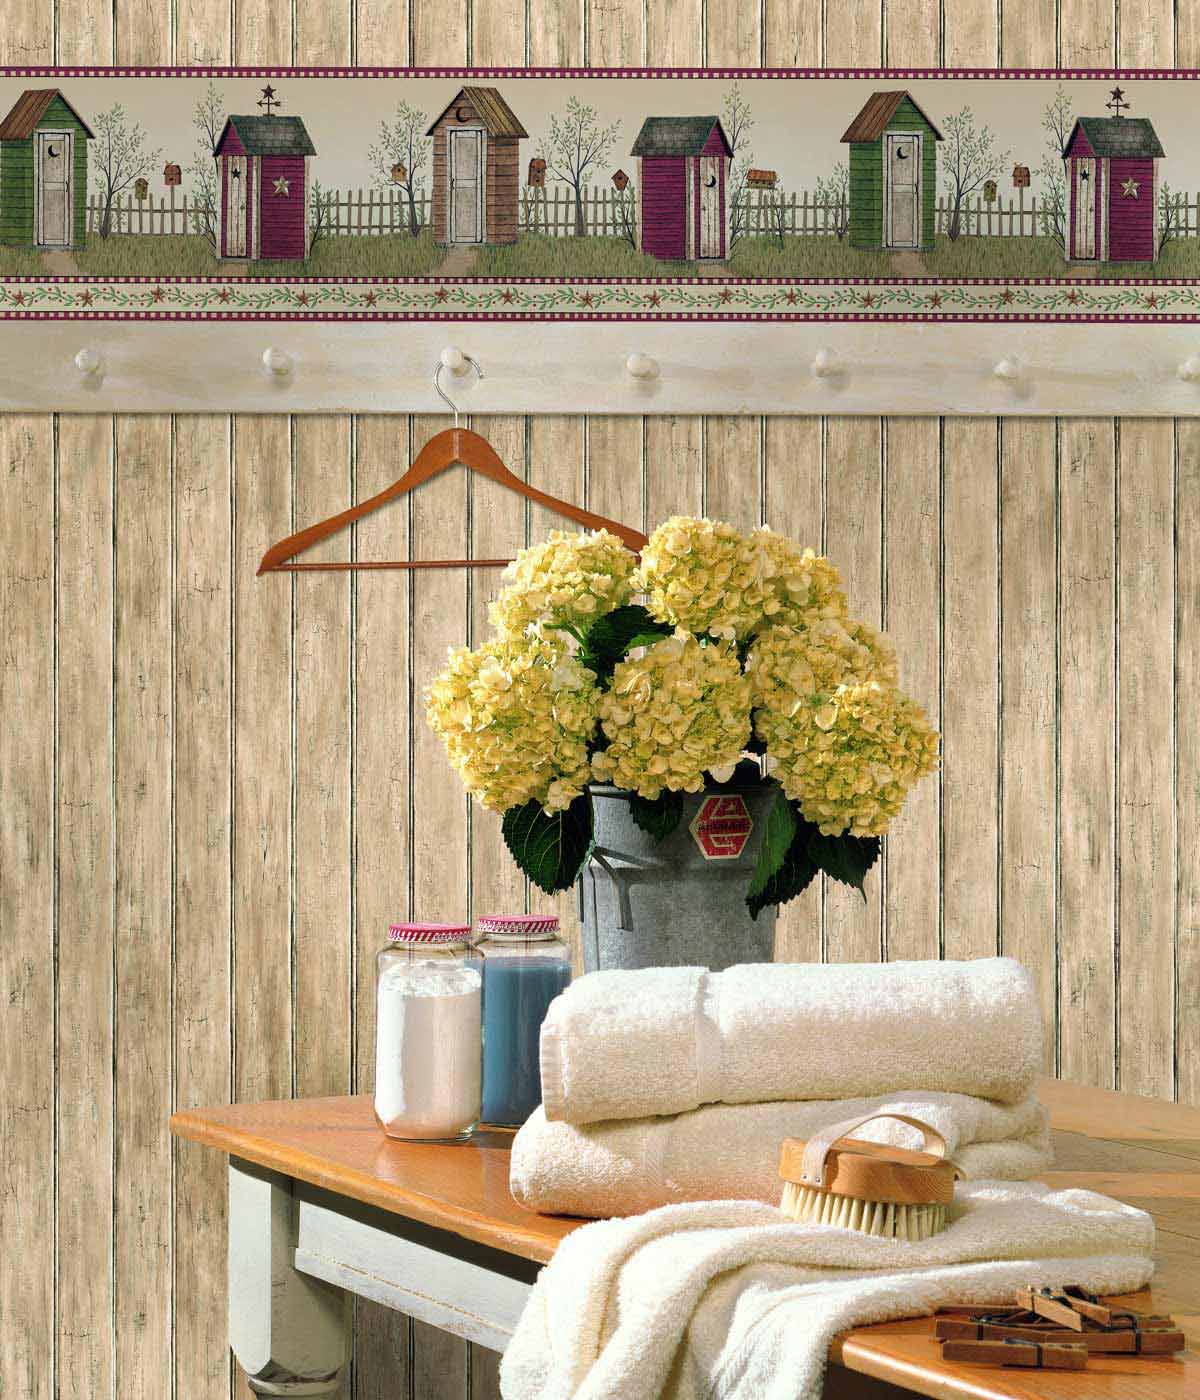 showing wallpaper on a wall in a washing room